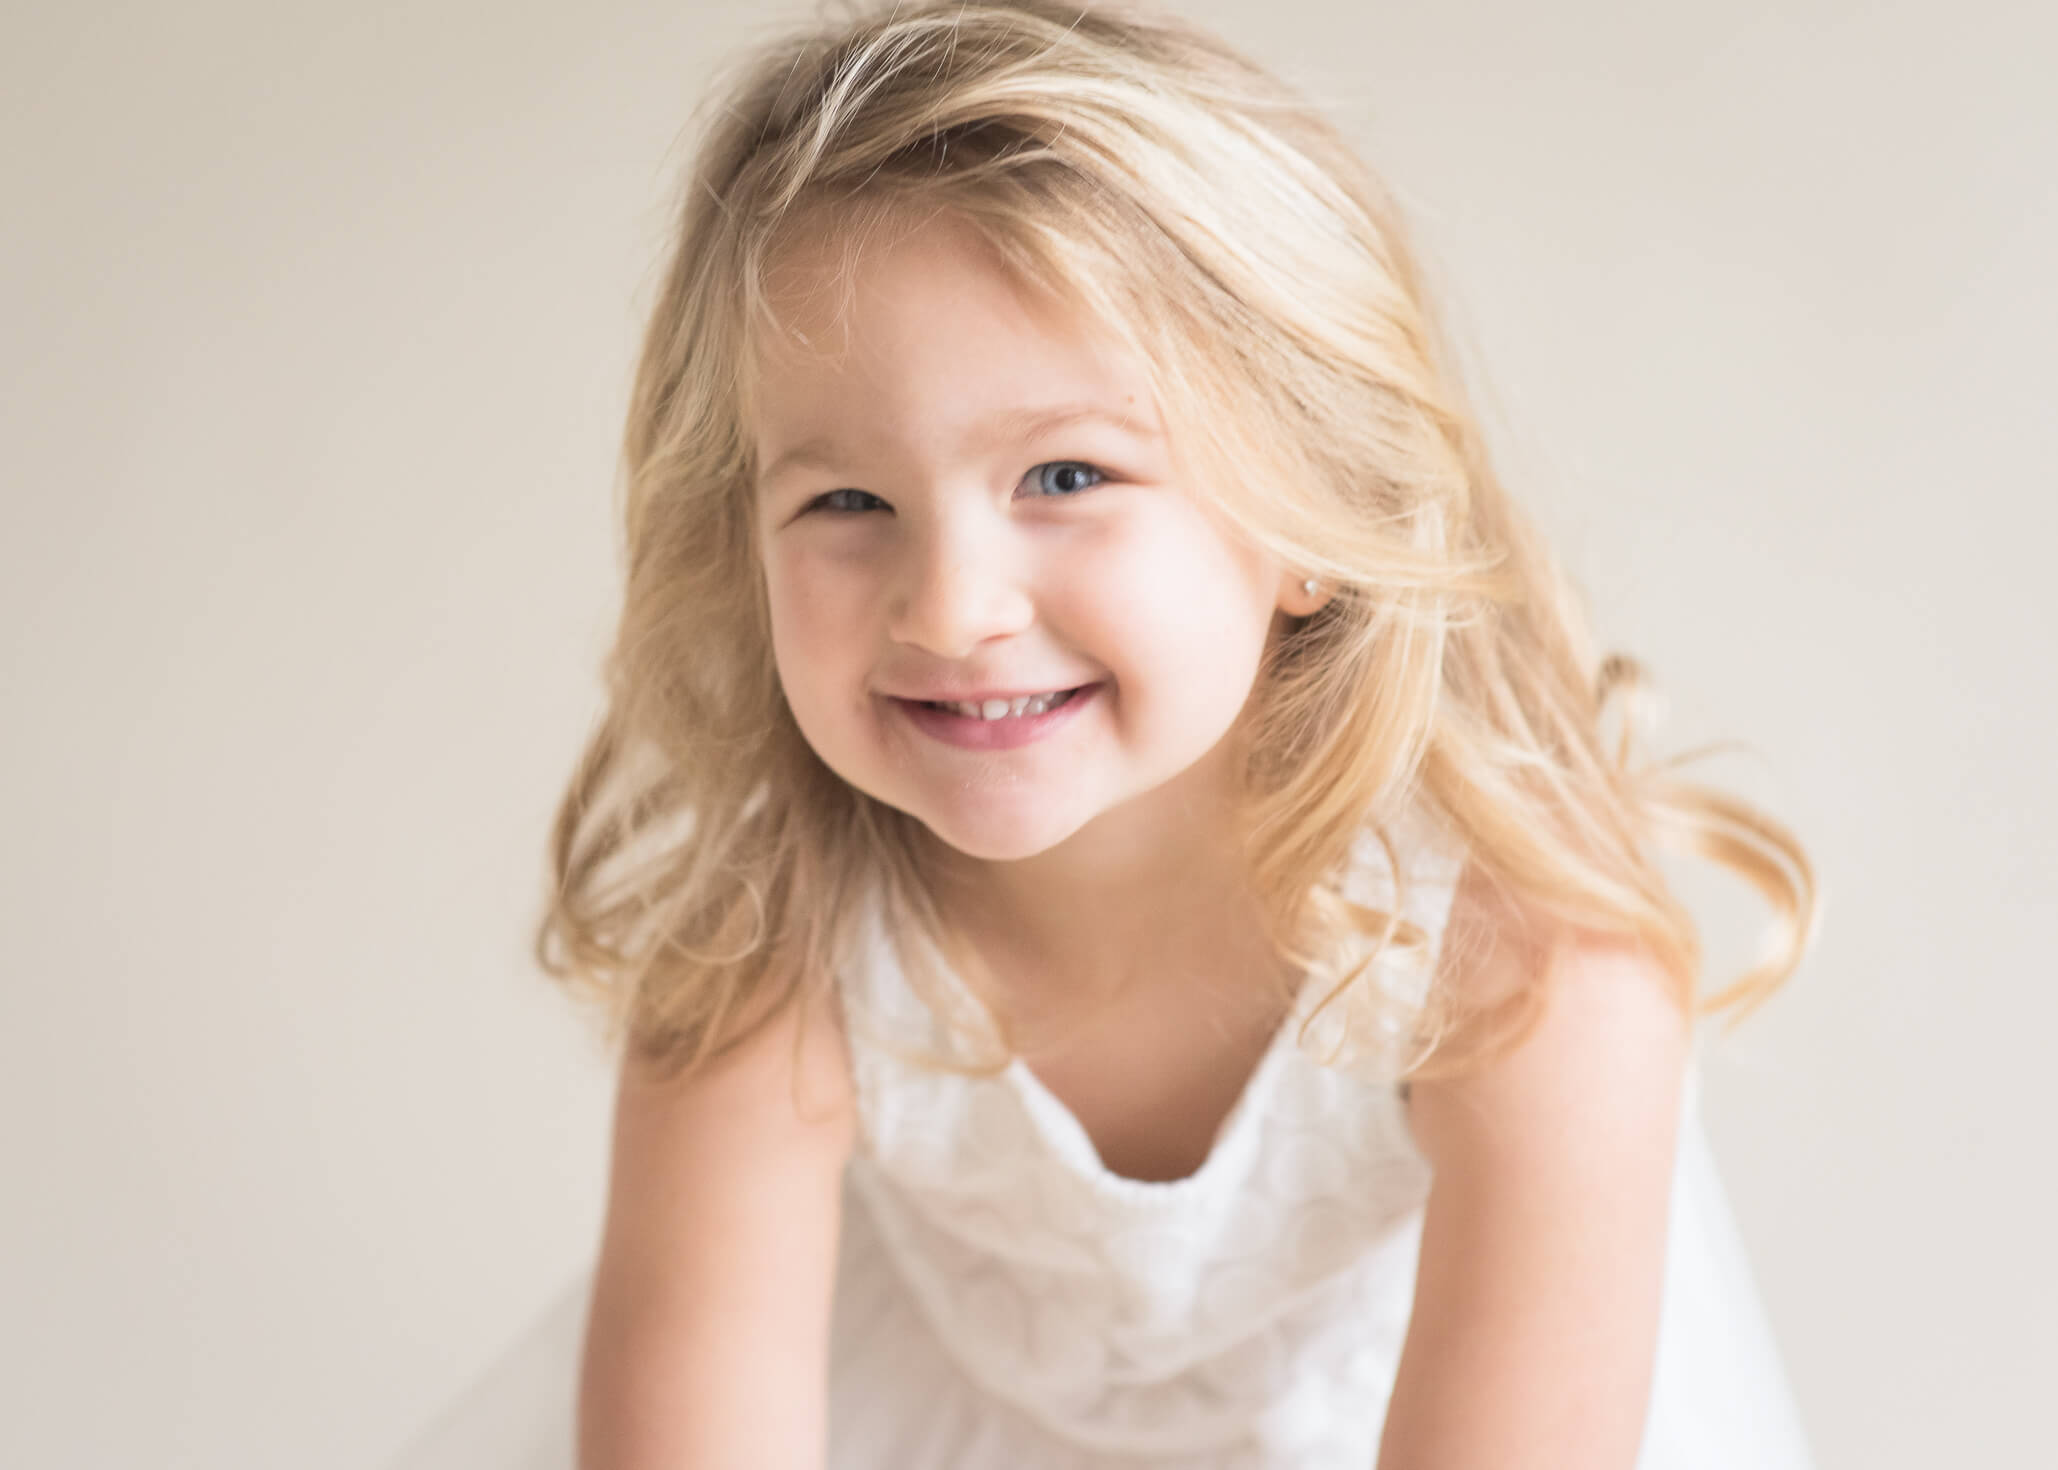 adorable preschooler being spunky and silly in studio session wearing white dress on a light background captured by Allison Amores Photography